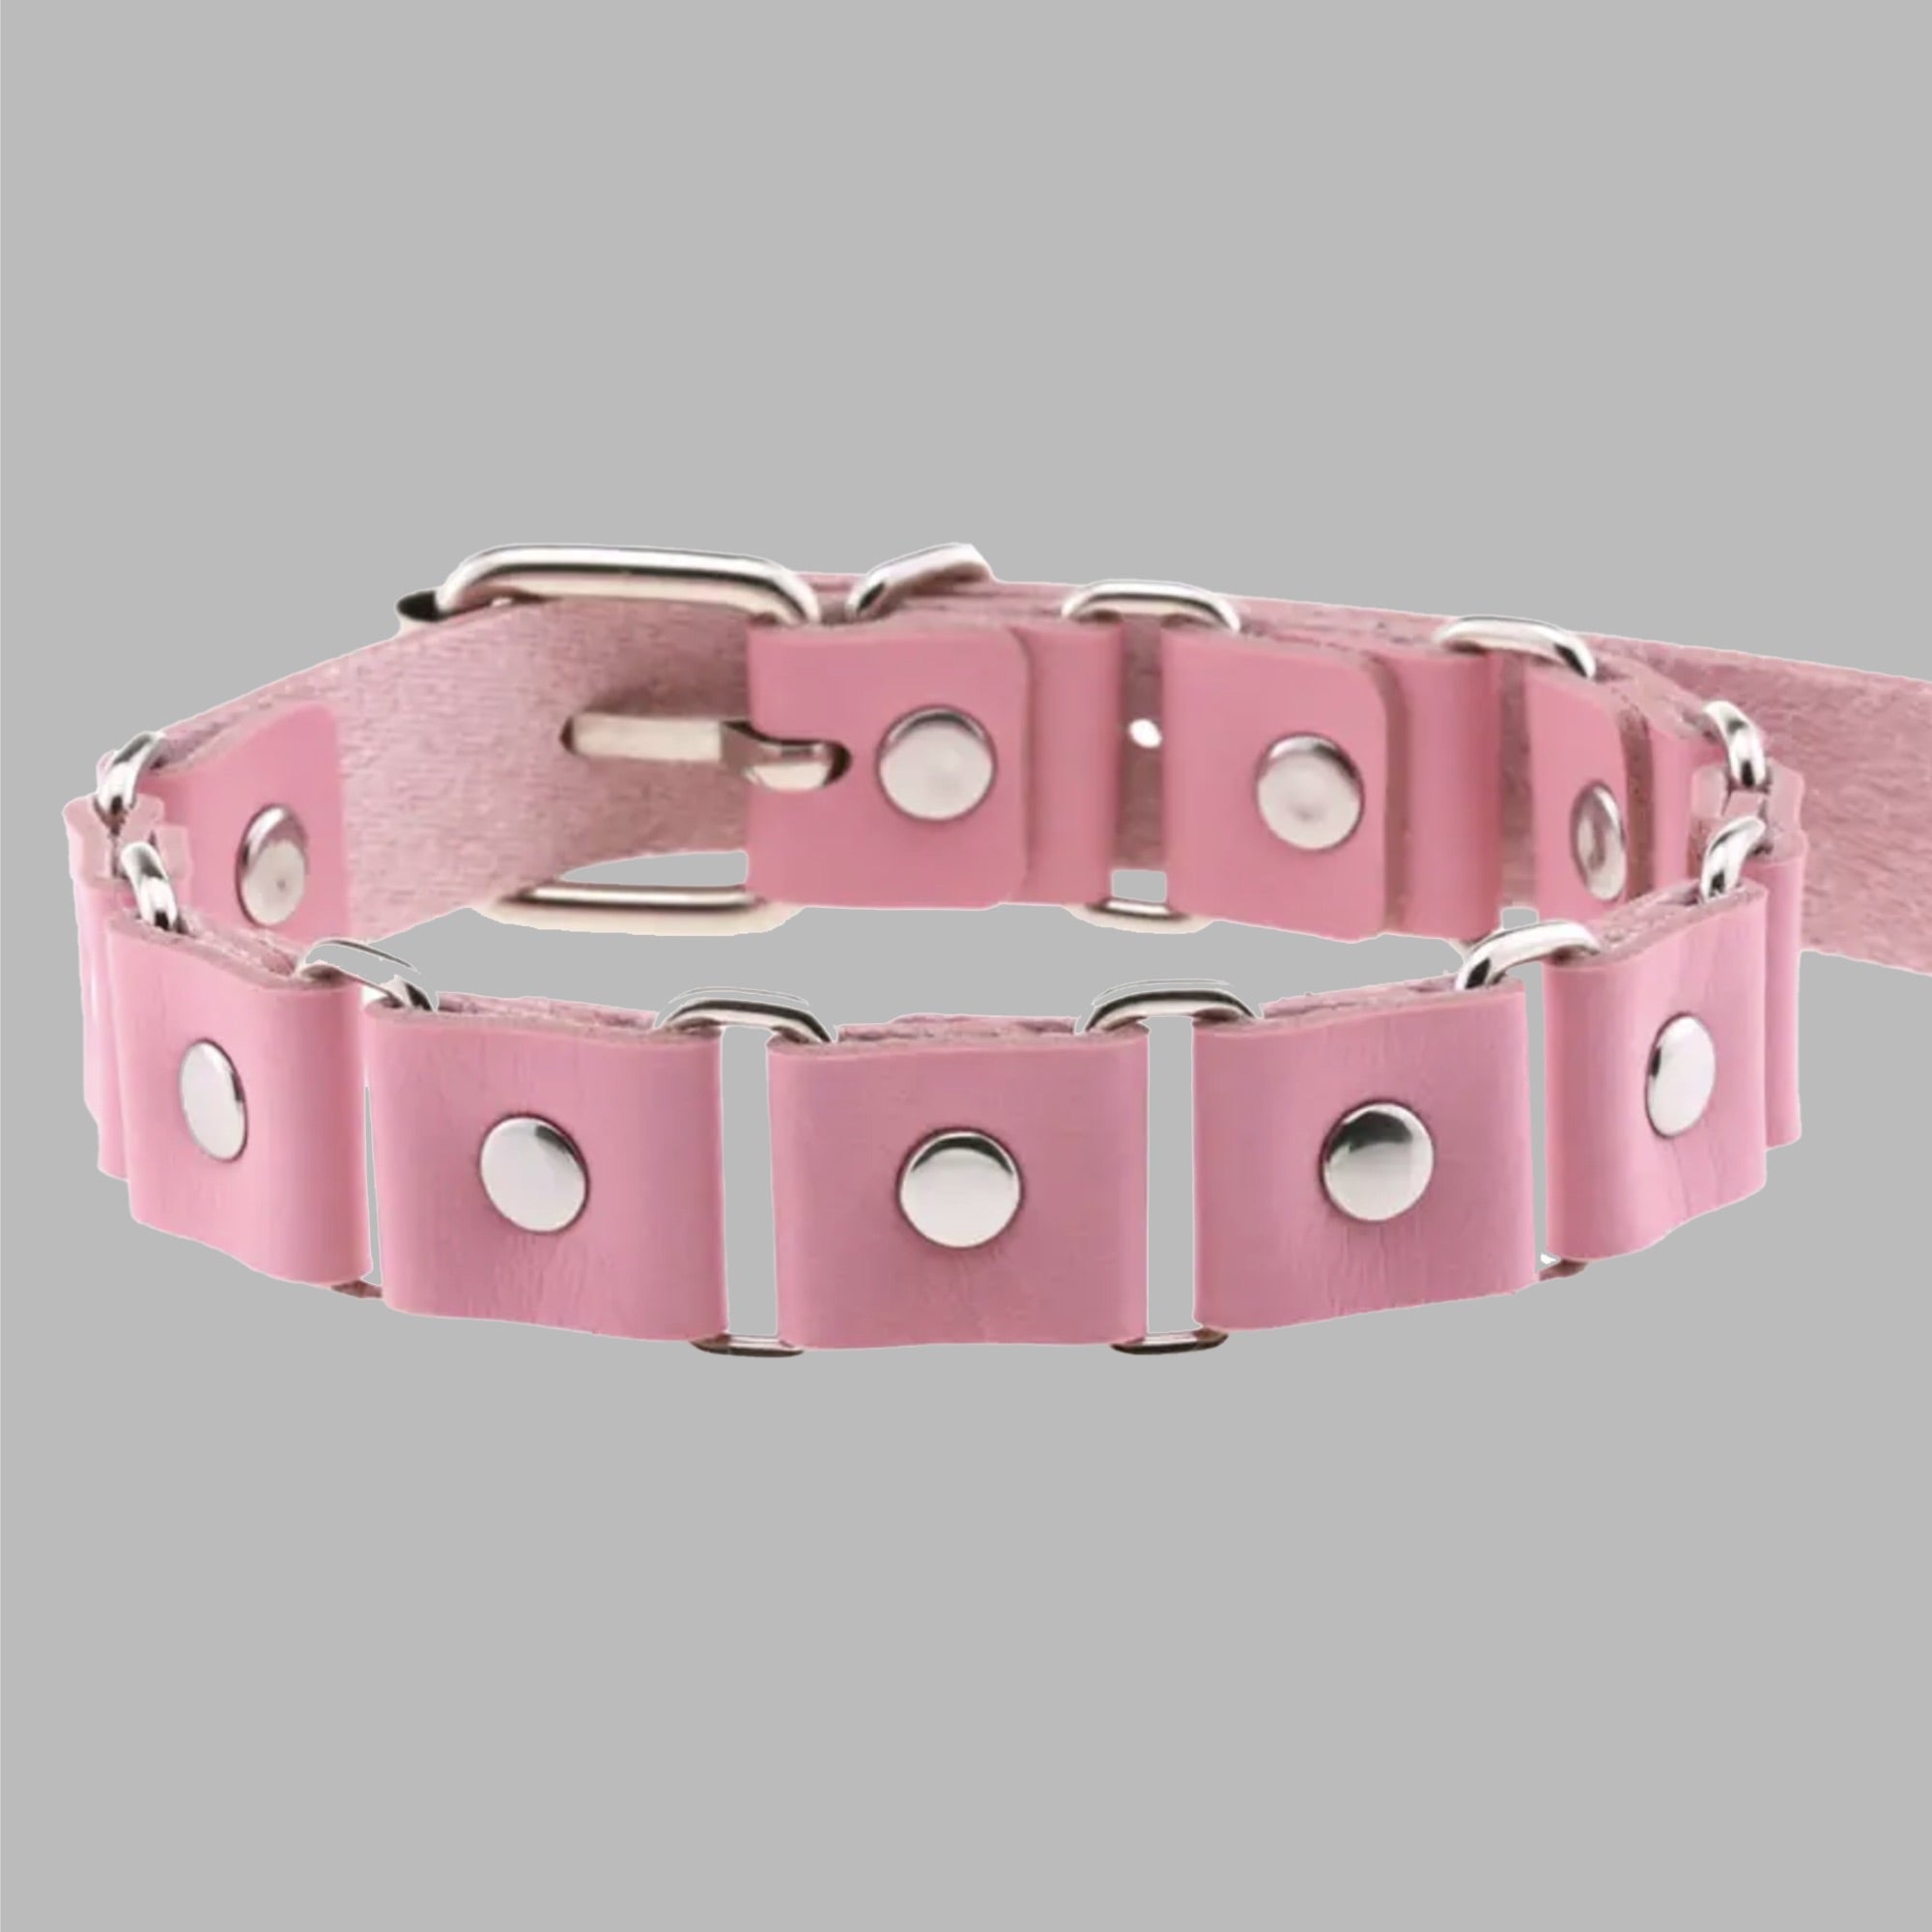 Linked Studded Collar - Baby Pink